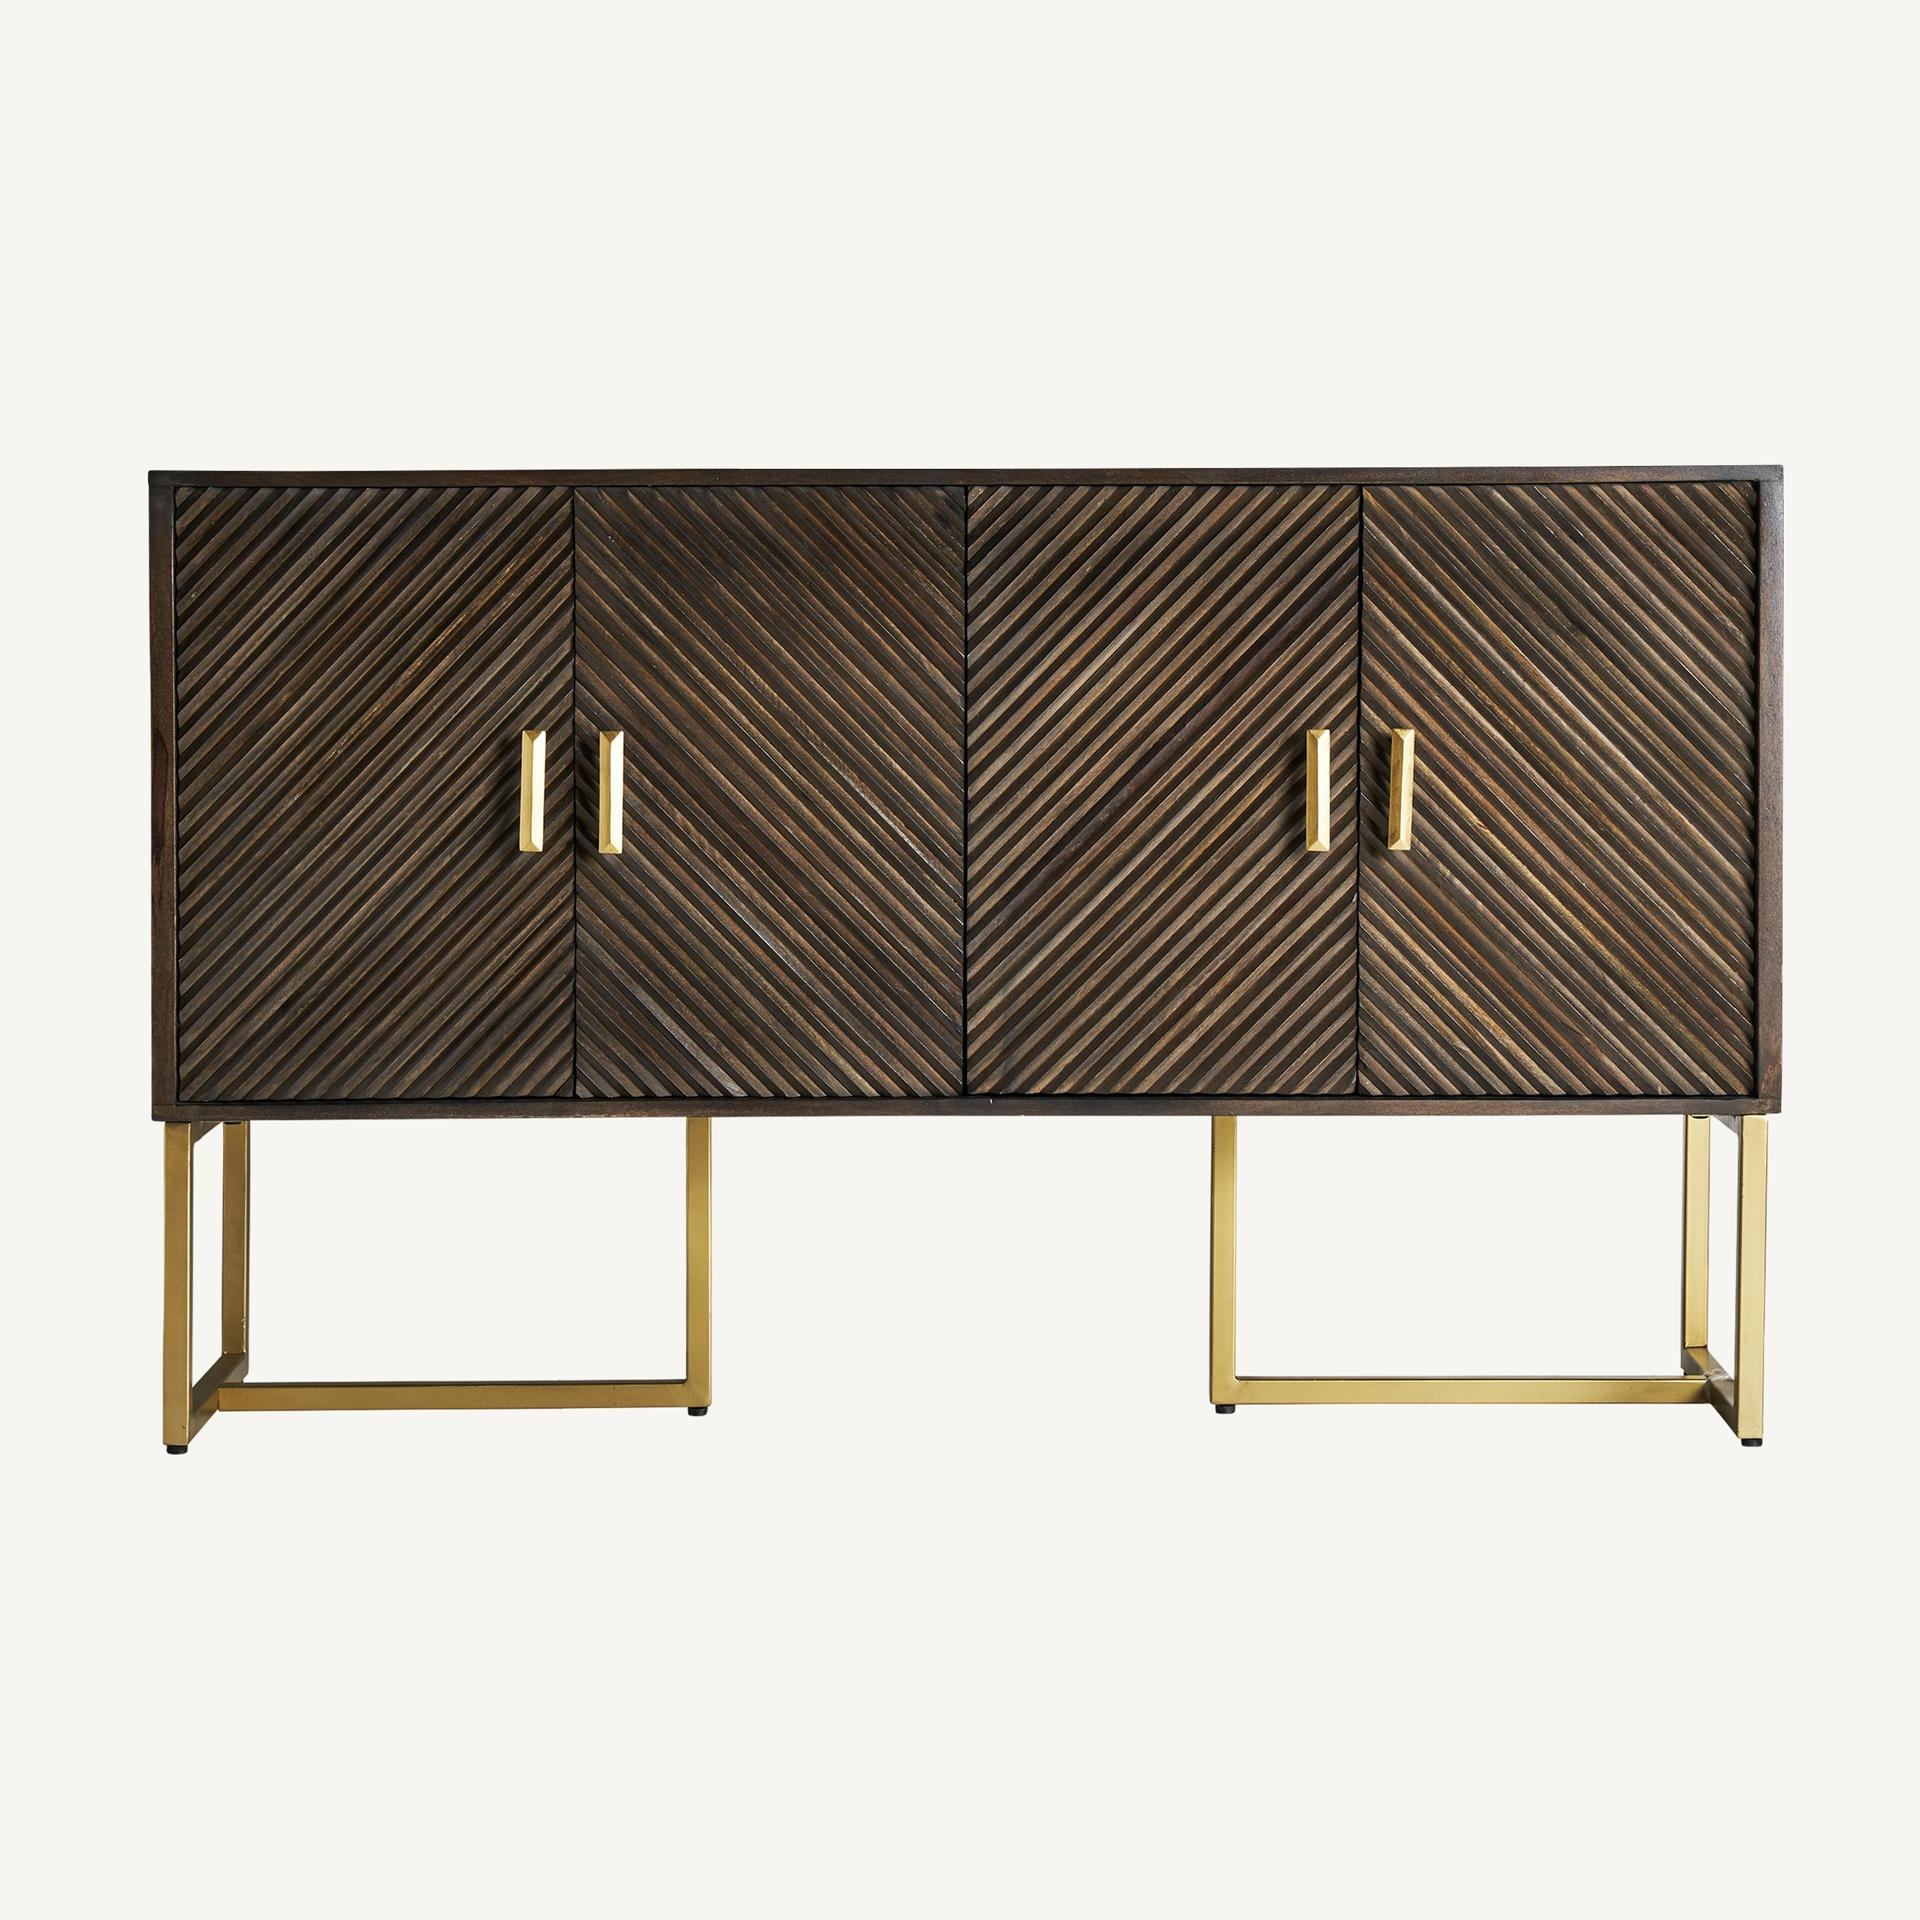 Contemporary MCM Style and Brutalist Design Wooden and Gilded Metal Sideboard For Sale